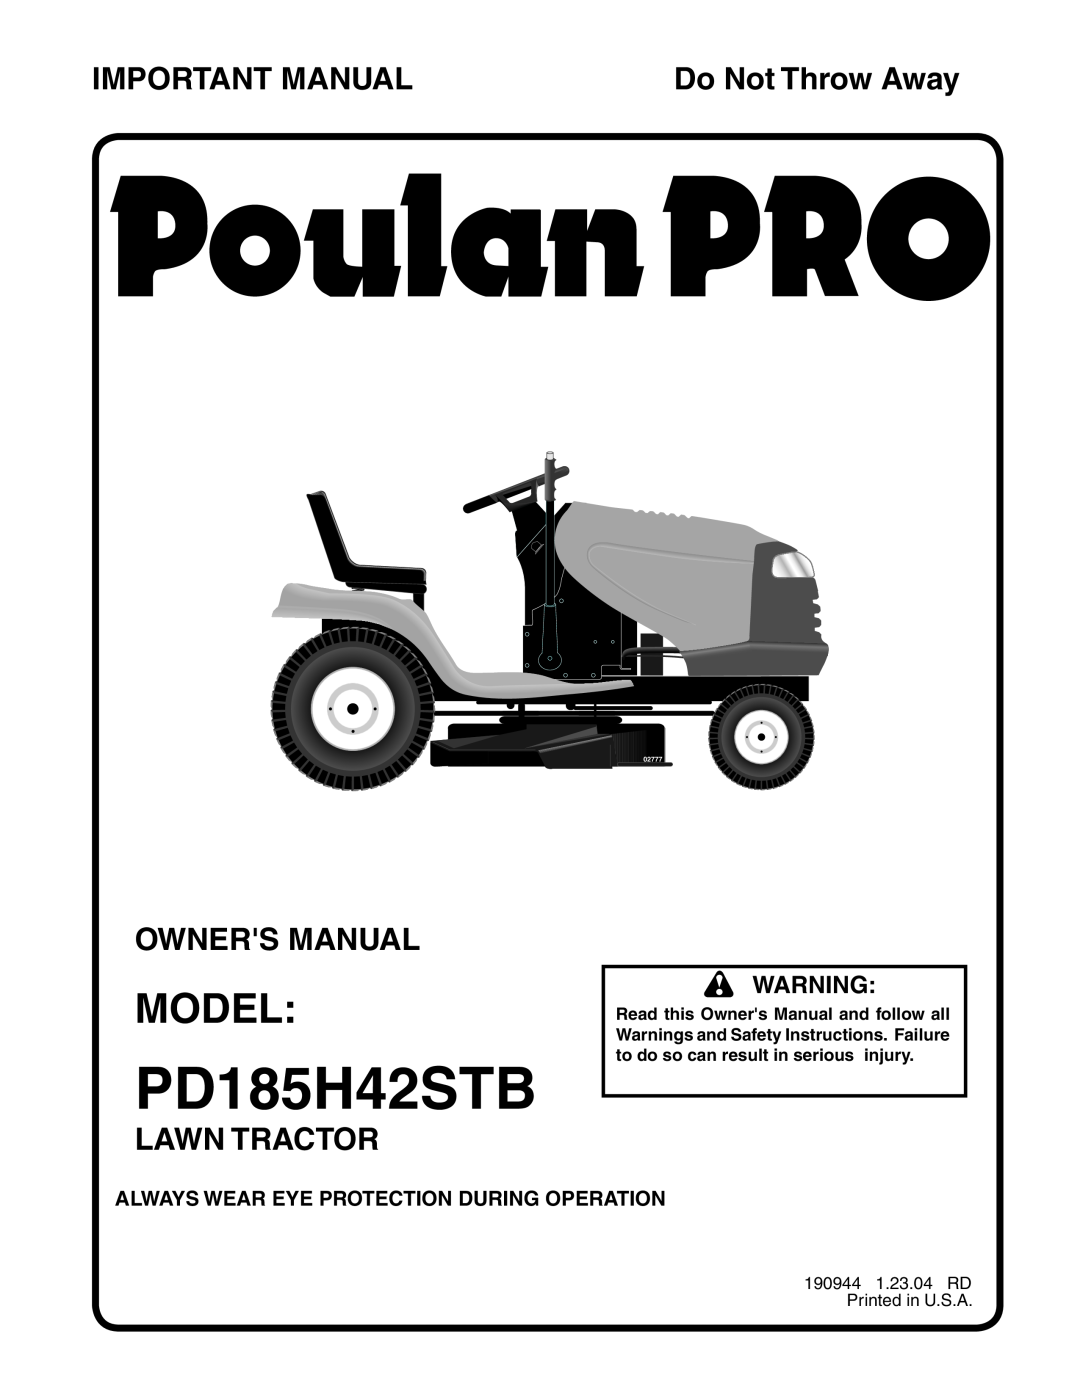 Poulan 190944 owner manual Model, Important Manual, Owners Manual, Lawn Tractor, PD185H42STB, Do Not Throw Away, 02777 